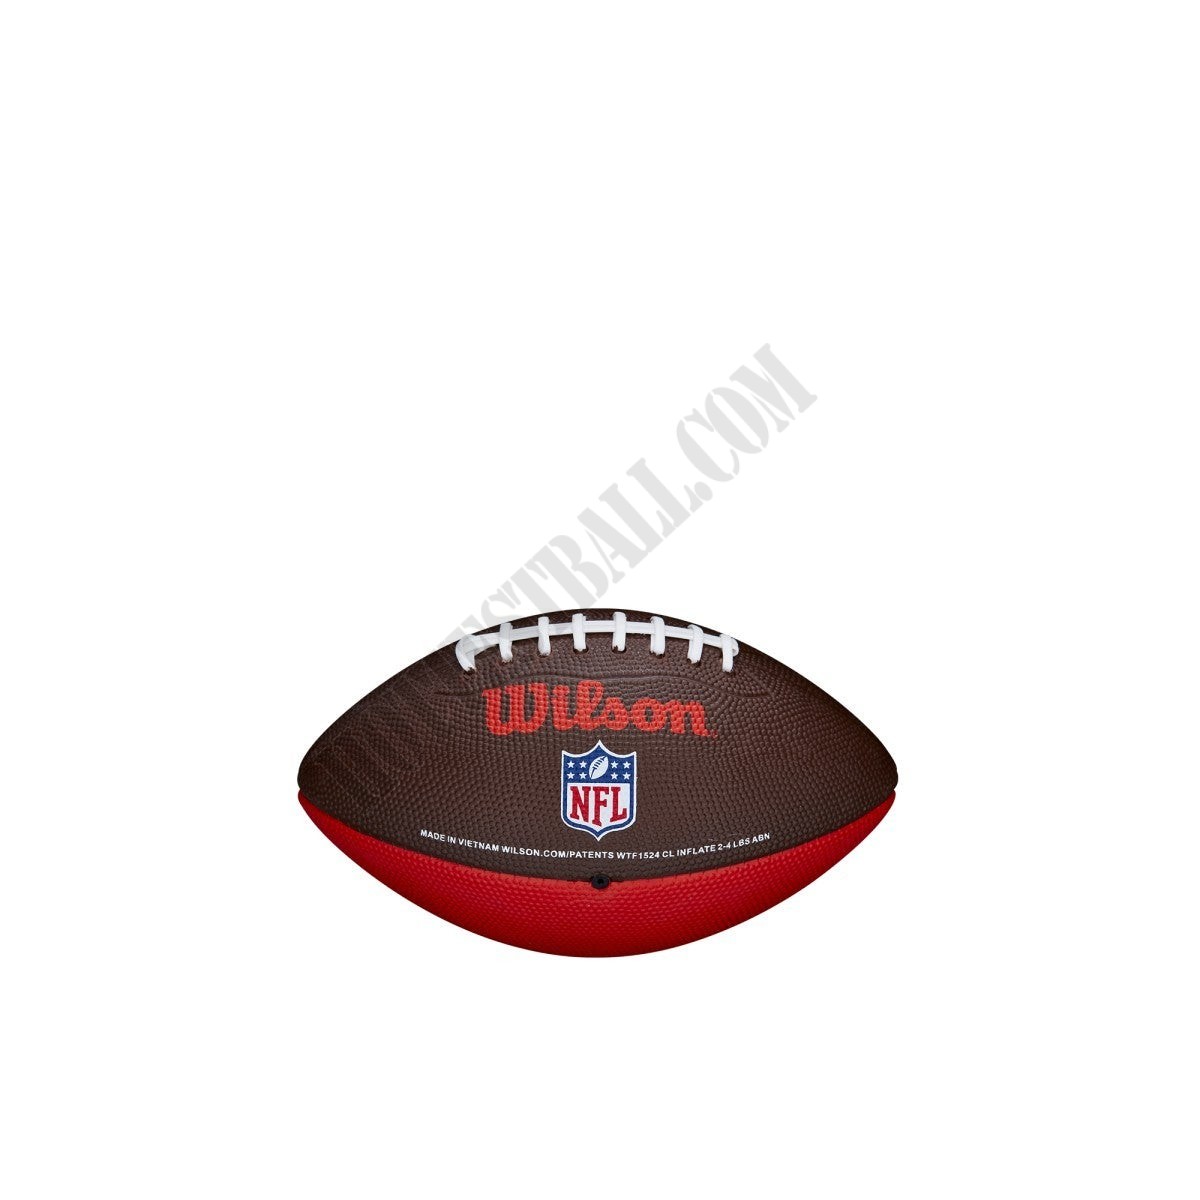 NFL Retro Mini Football - Cleveland Browns ● Wilson Promotions - -1